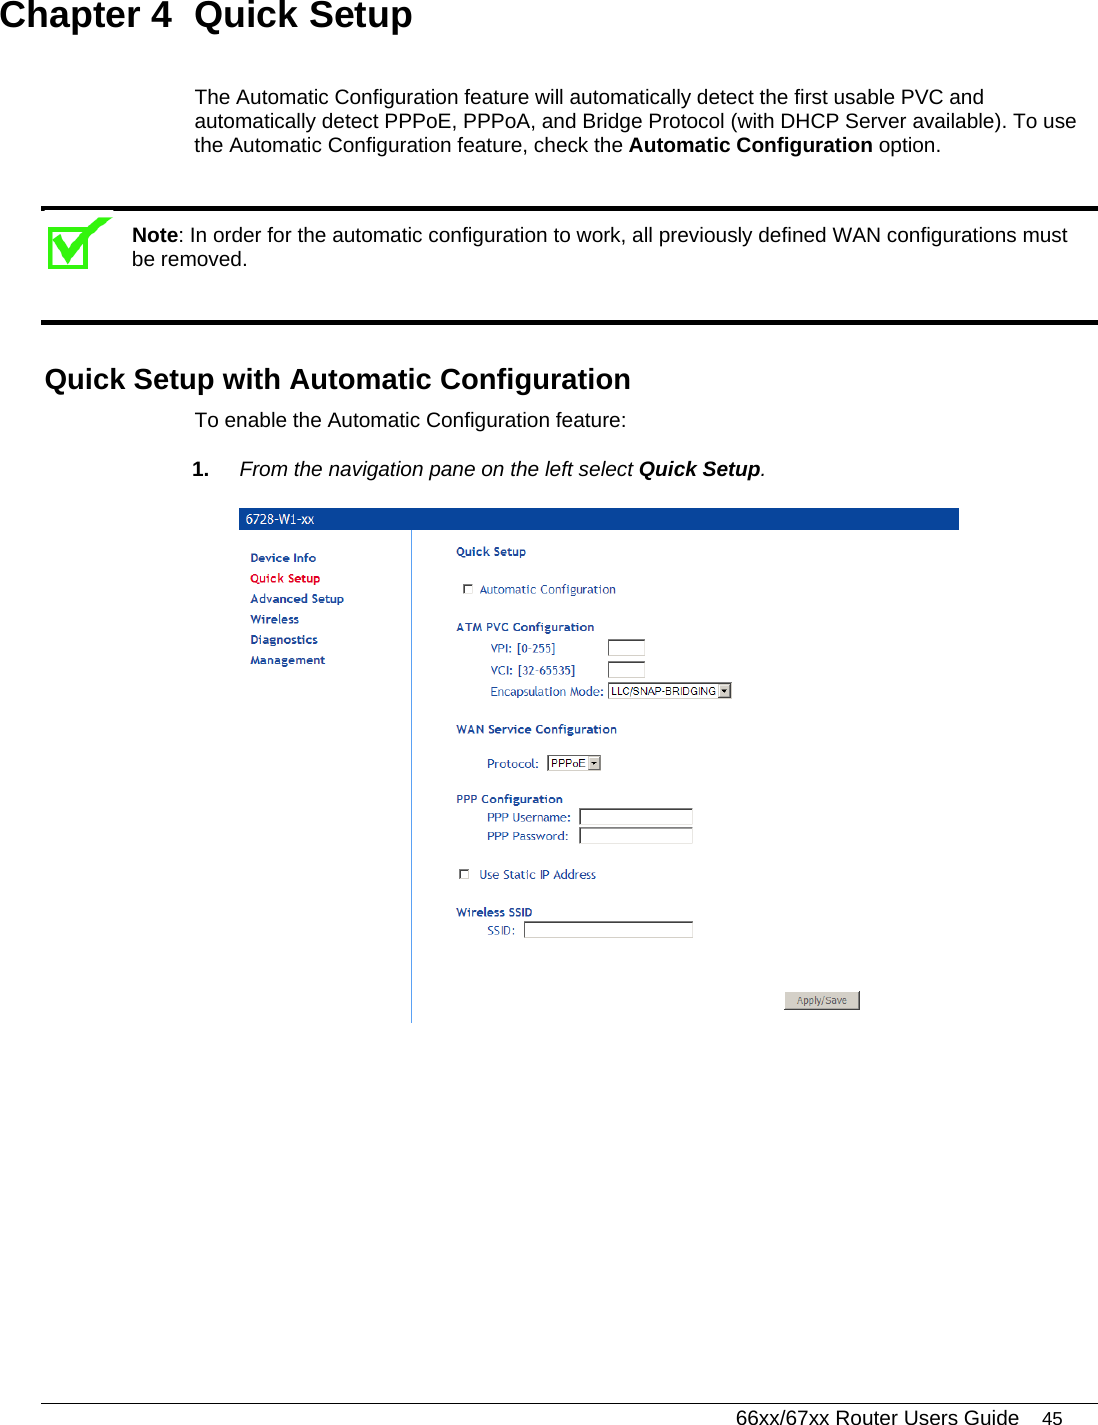   66xx/67xx Router Users Guide 45 Chapter 4  Quick Setup The Automatic Configuration feature will automatically detect the first usable PVC and automatically detect PPPoE, PPPoA, and Bridge Protocol (with DHCP Server available). To use the Automatic Configuration feature, check the Automatic Configuration option.  Note: In order for the automatic configuration to work, all previously defined WAN configurations must be removed.  Quick Setup with Automatic Configuration To enable the Automatic Configuration feature: 1.  From the navigation pane on the left select Quick Setup.  